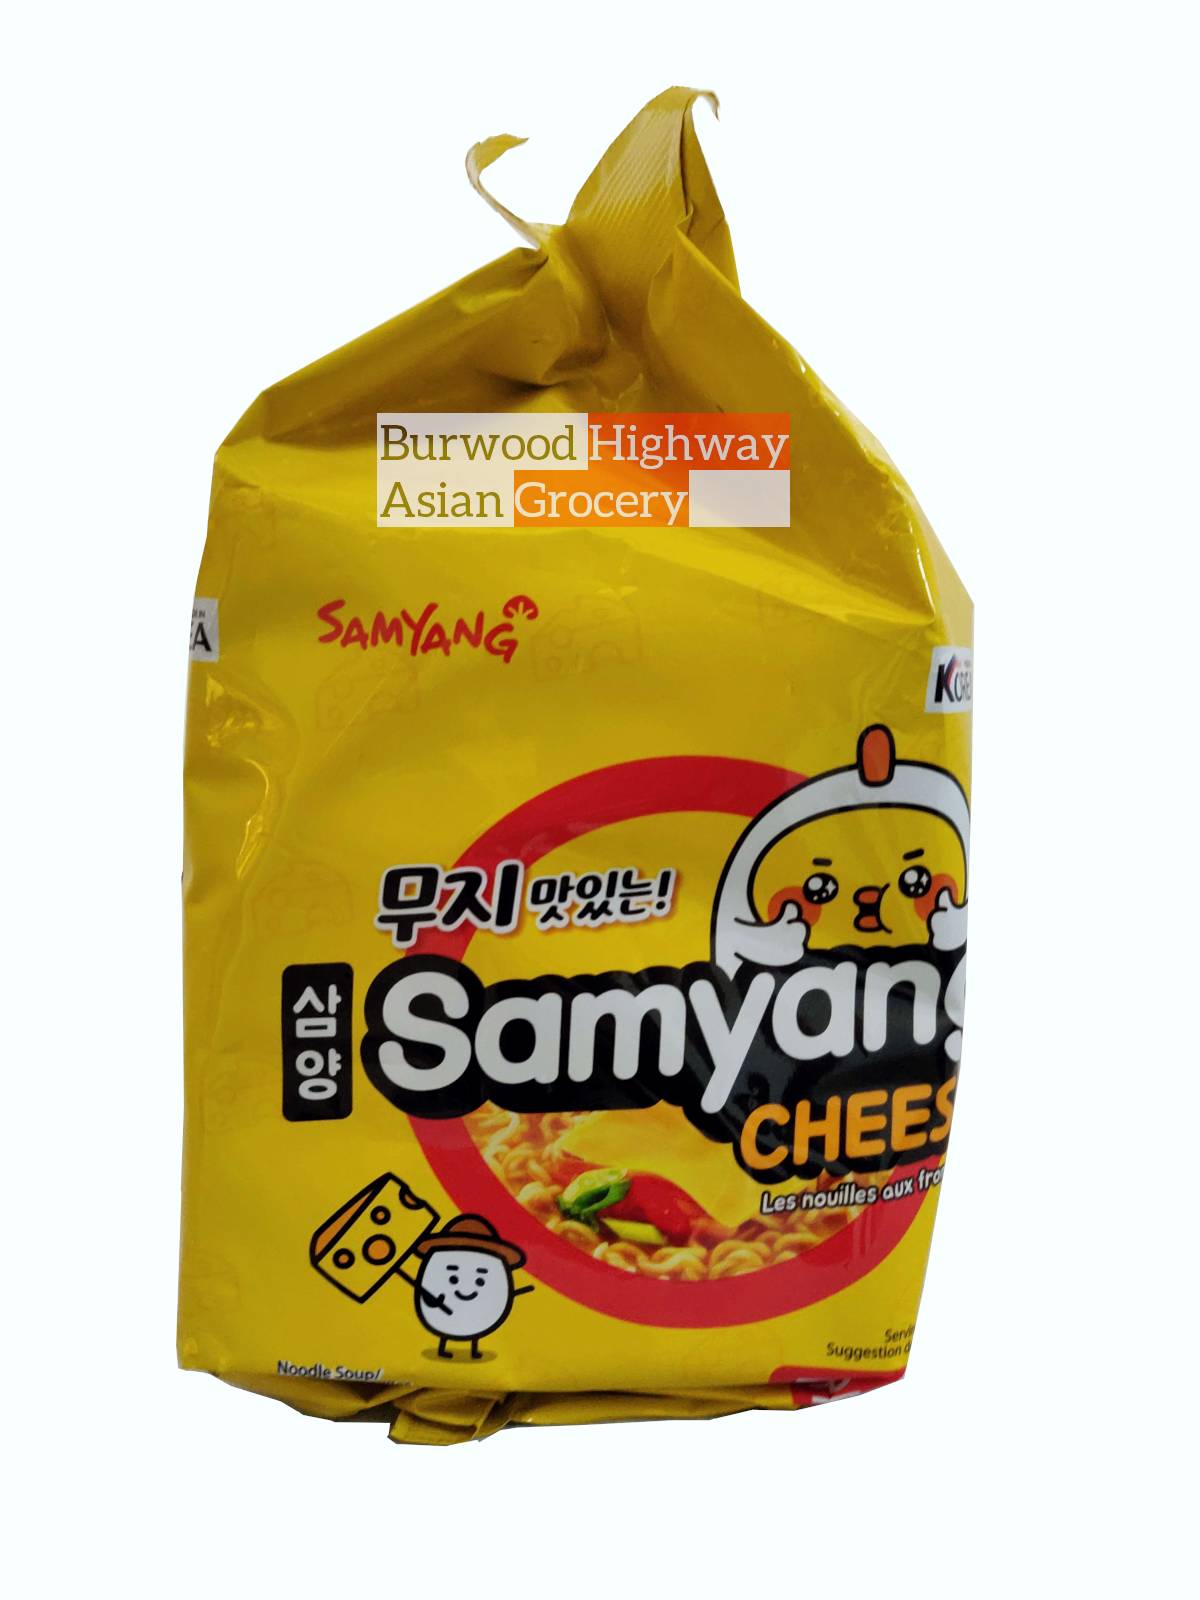 Samyang Cheese Noodle Soup 5 pack - Burwood Highway Asian Grocery